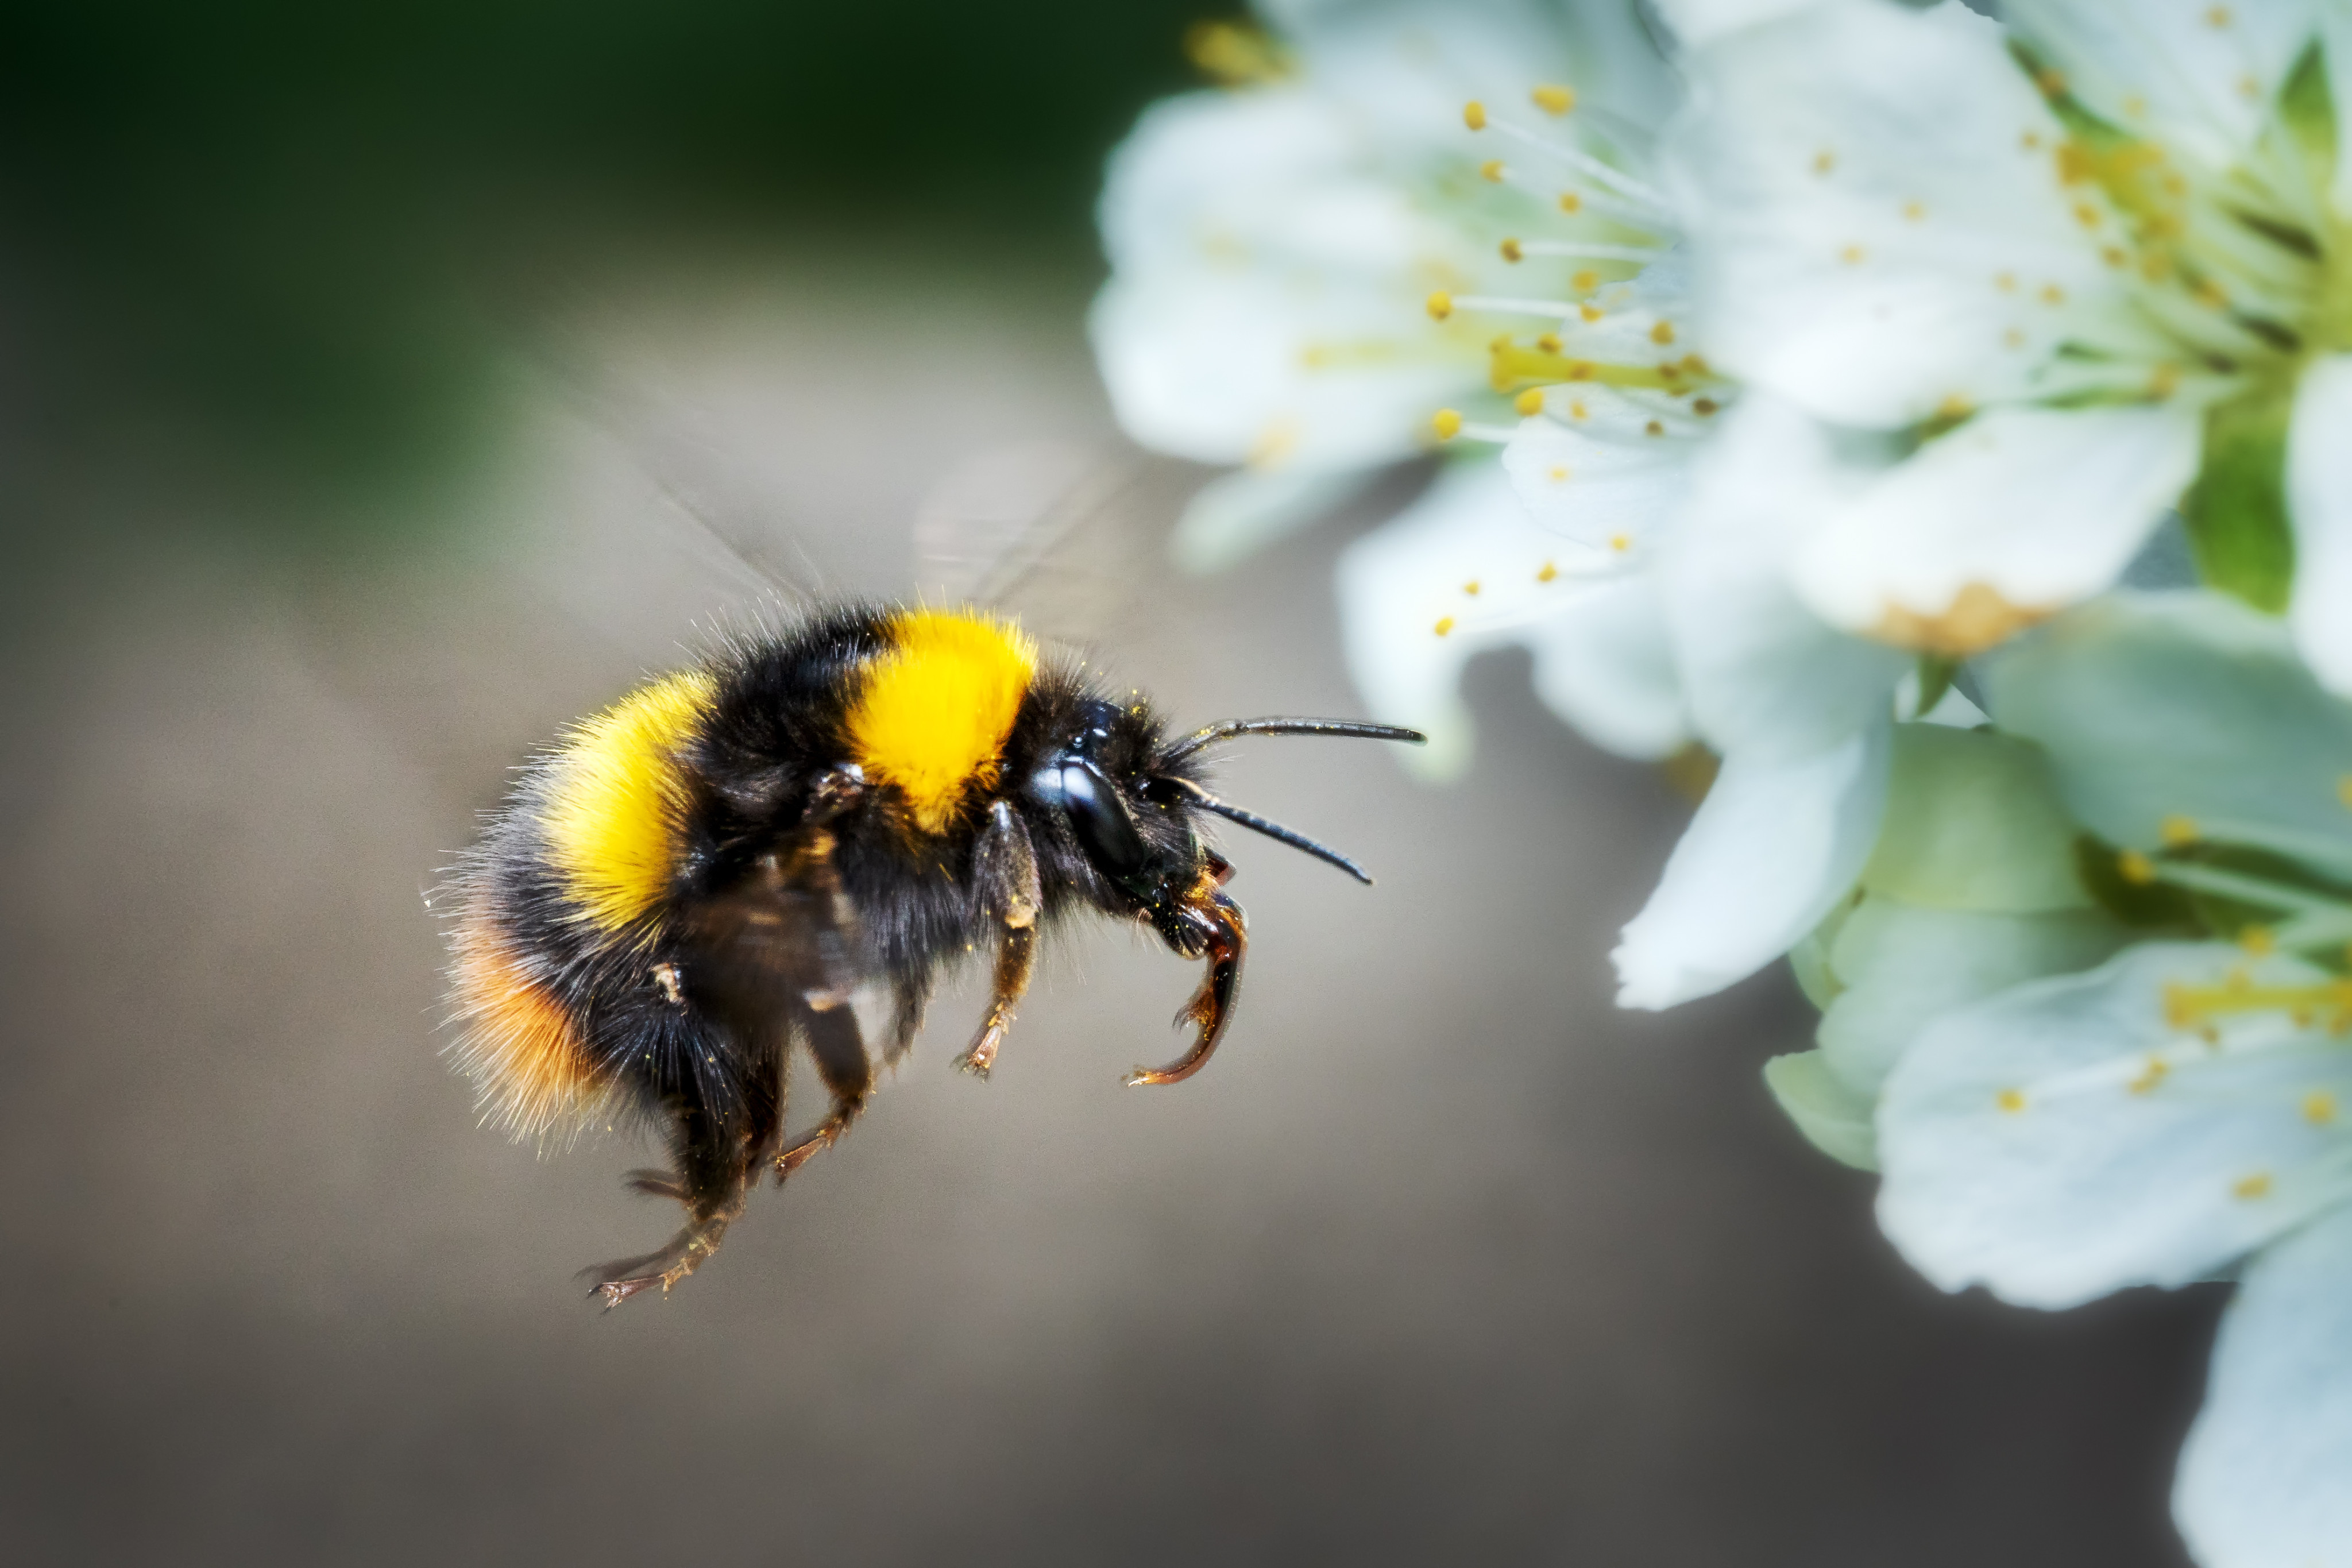 Bumble bees and climate change